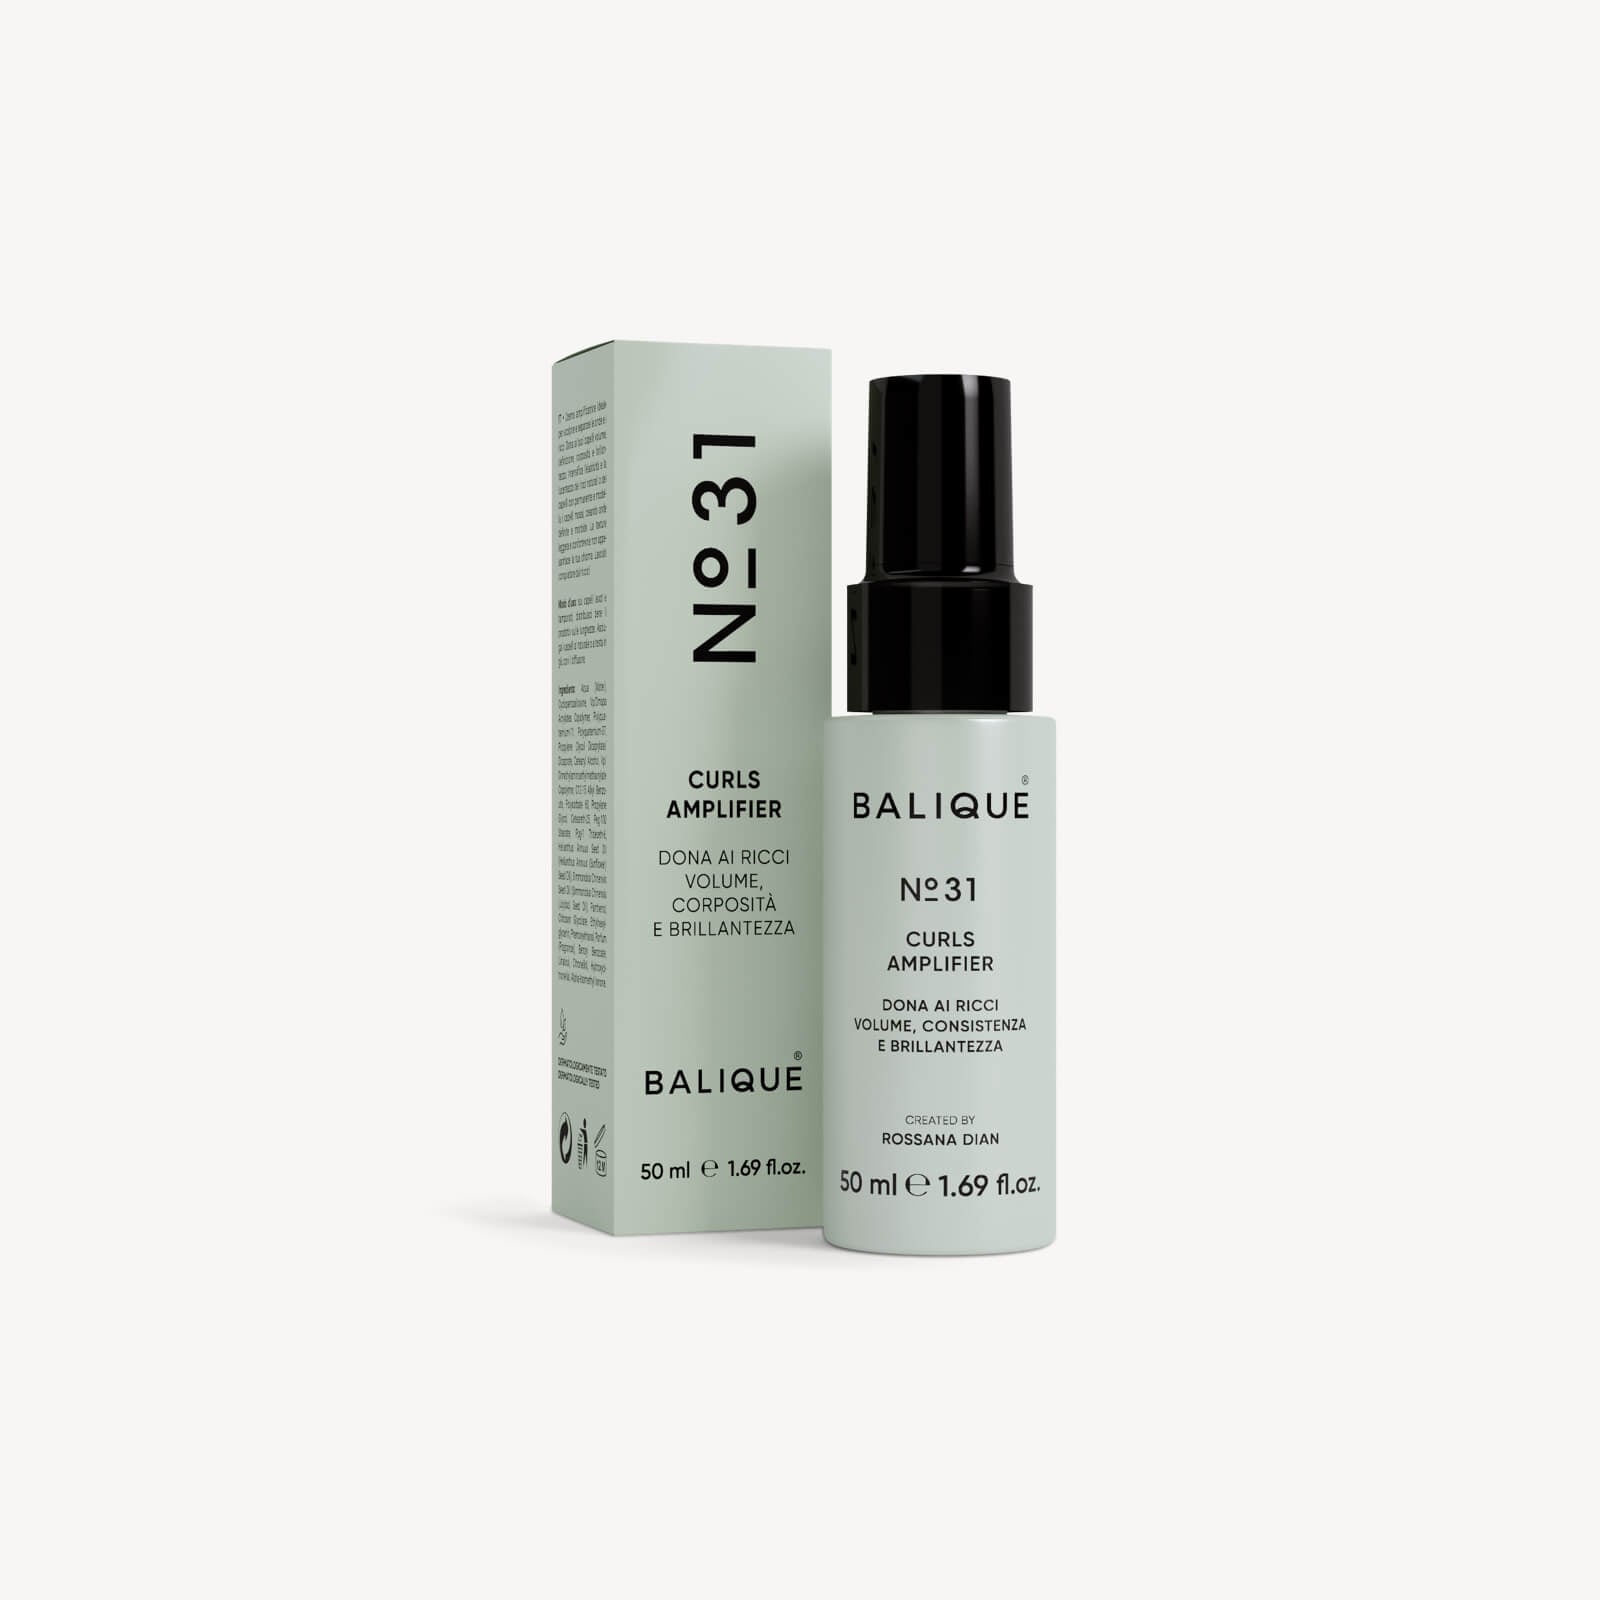 BOX 03 - TRAVEL SIZE - Untreated curly hair - Complete treatment 